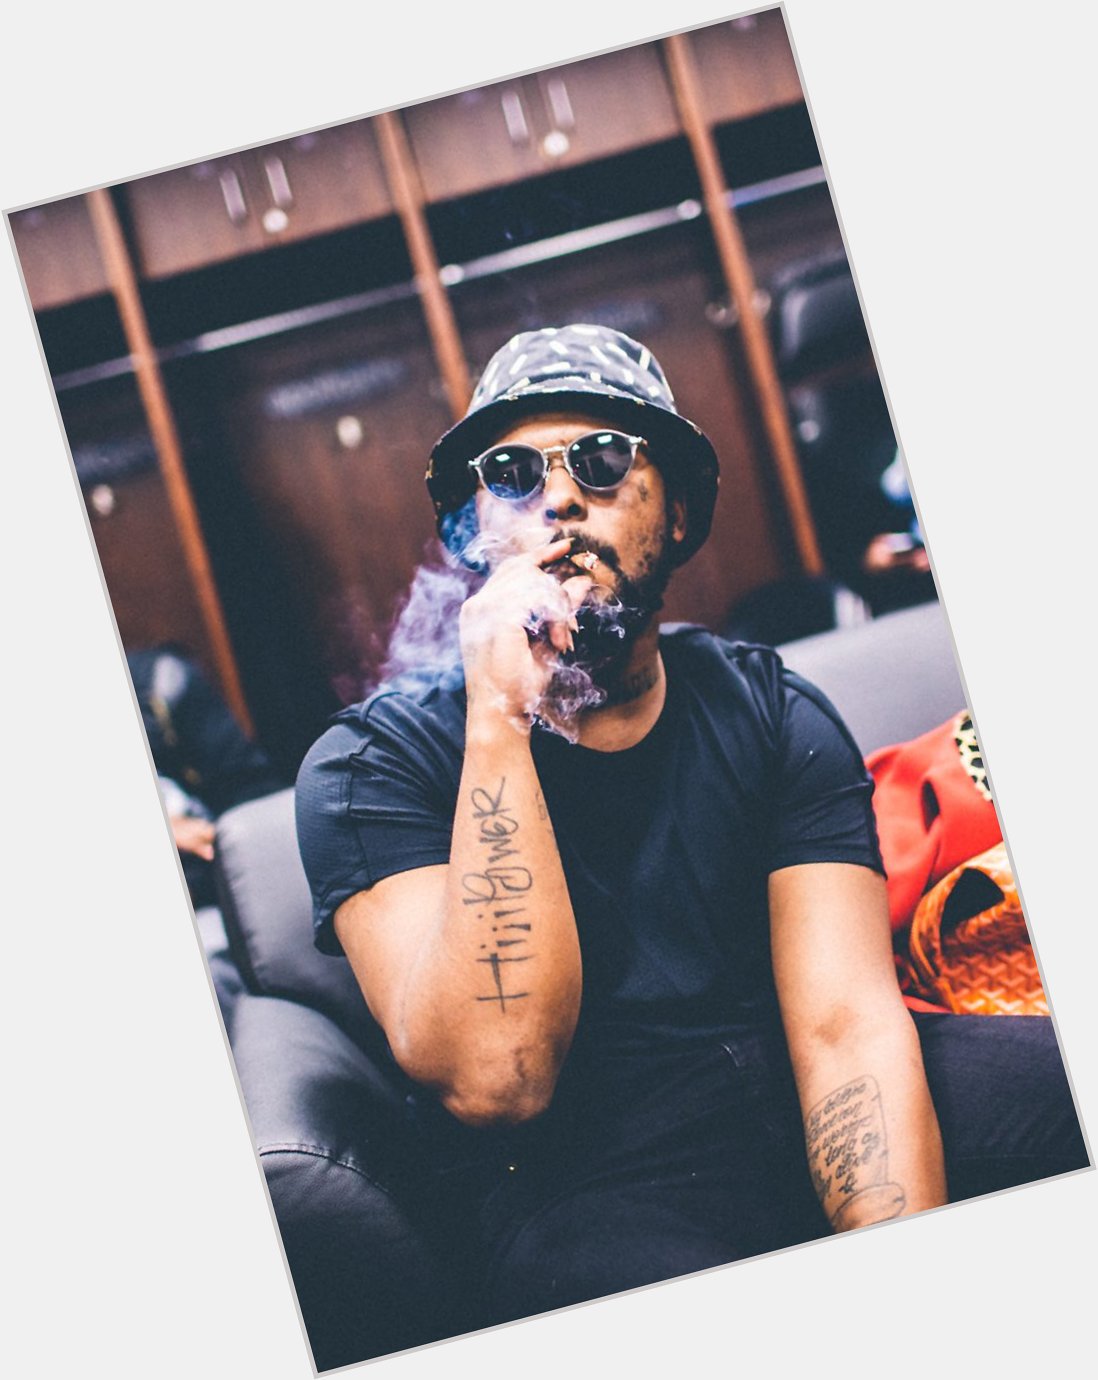 Happy 36th Birthday, ScHoolboy Q

What s your favorite song of his? 